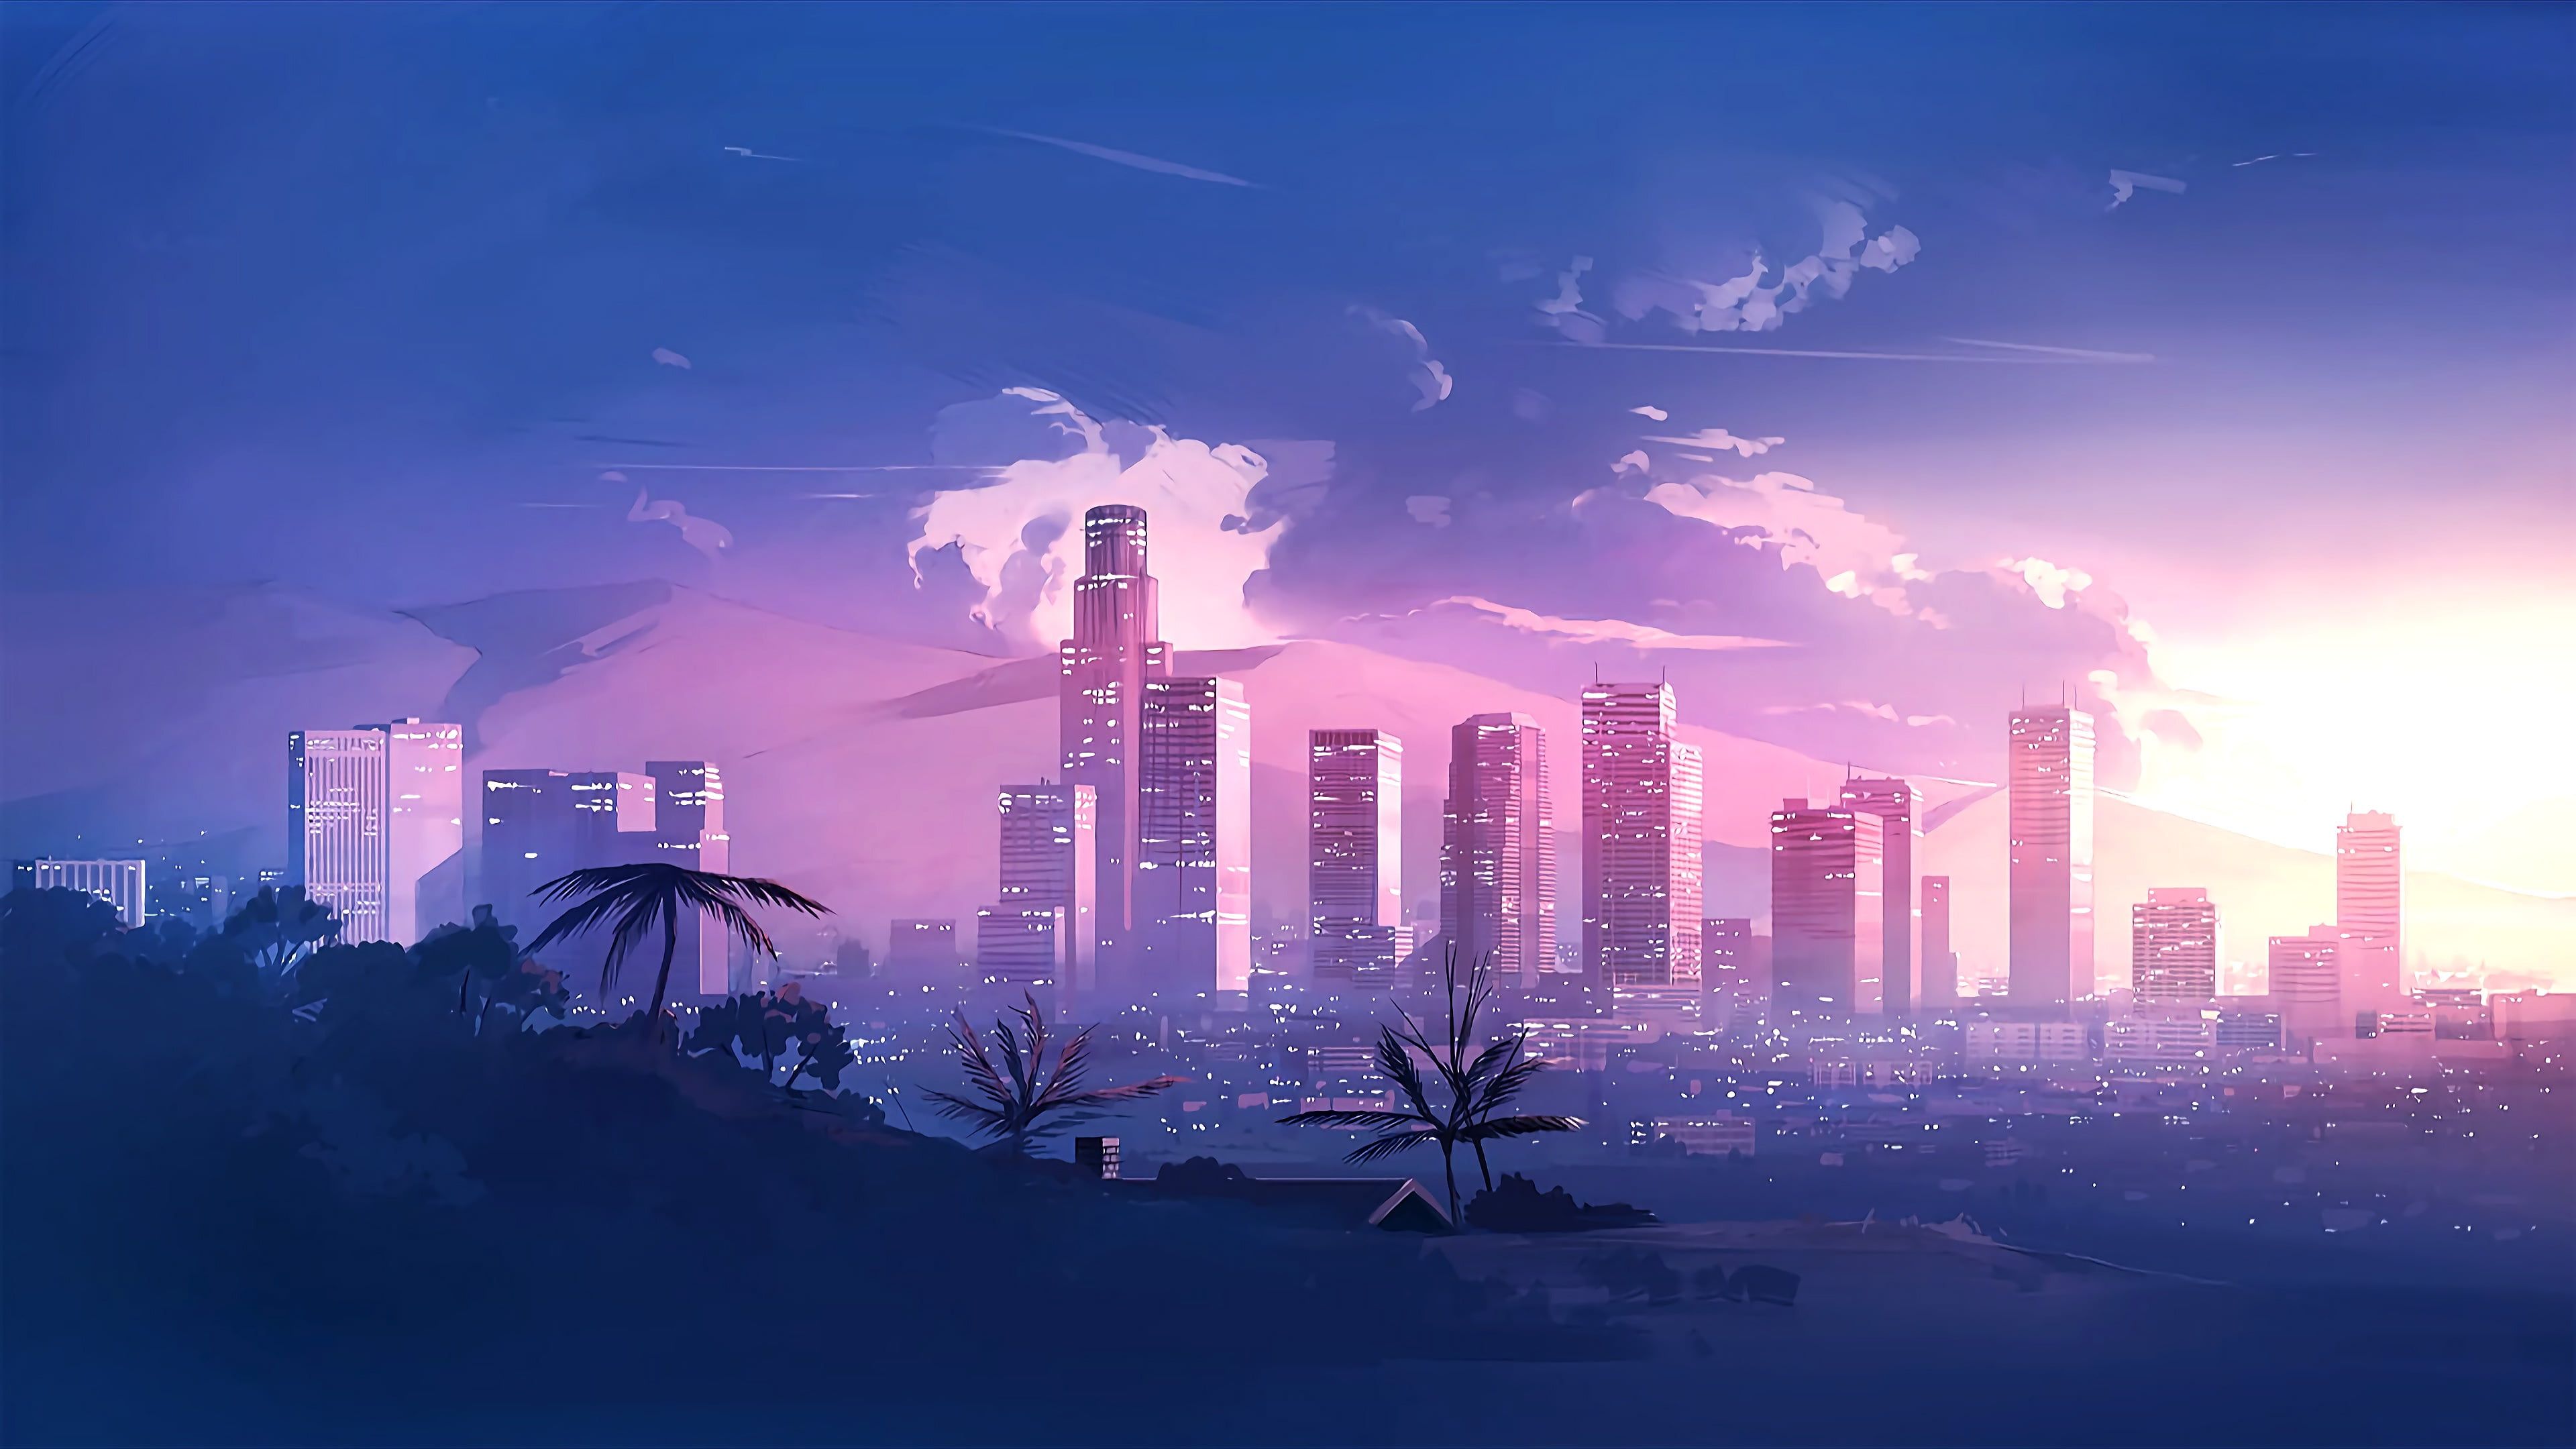 Music The city #Style #Landscape s #Style #Neon #Illustration 's #Synth #Retrowave #Synthwave New R. Anime scenery wallpaper, City wallpaper, Anime scenery